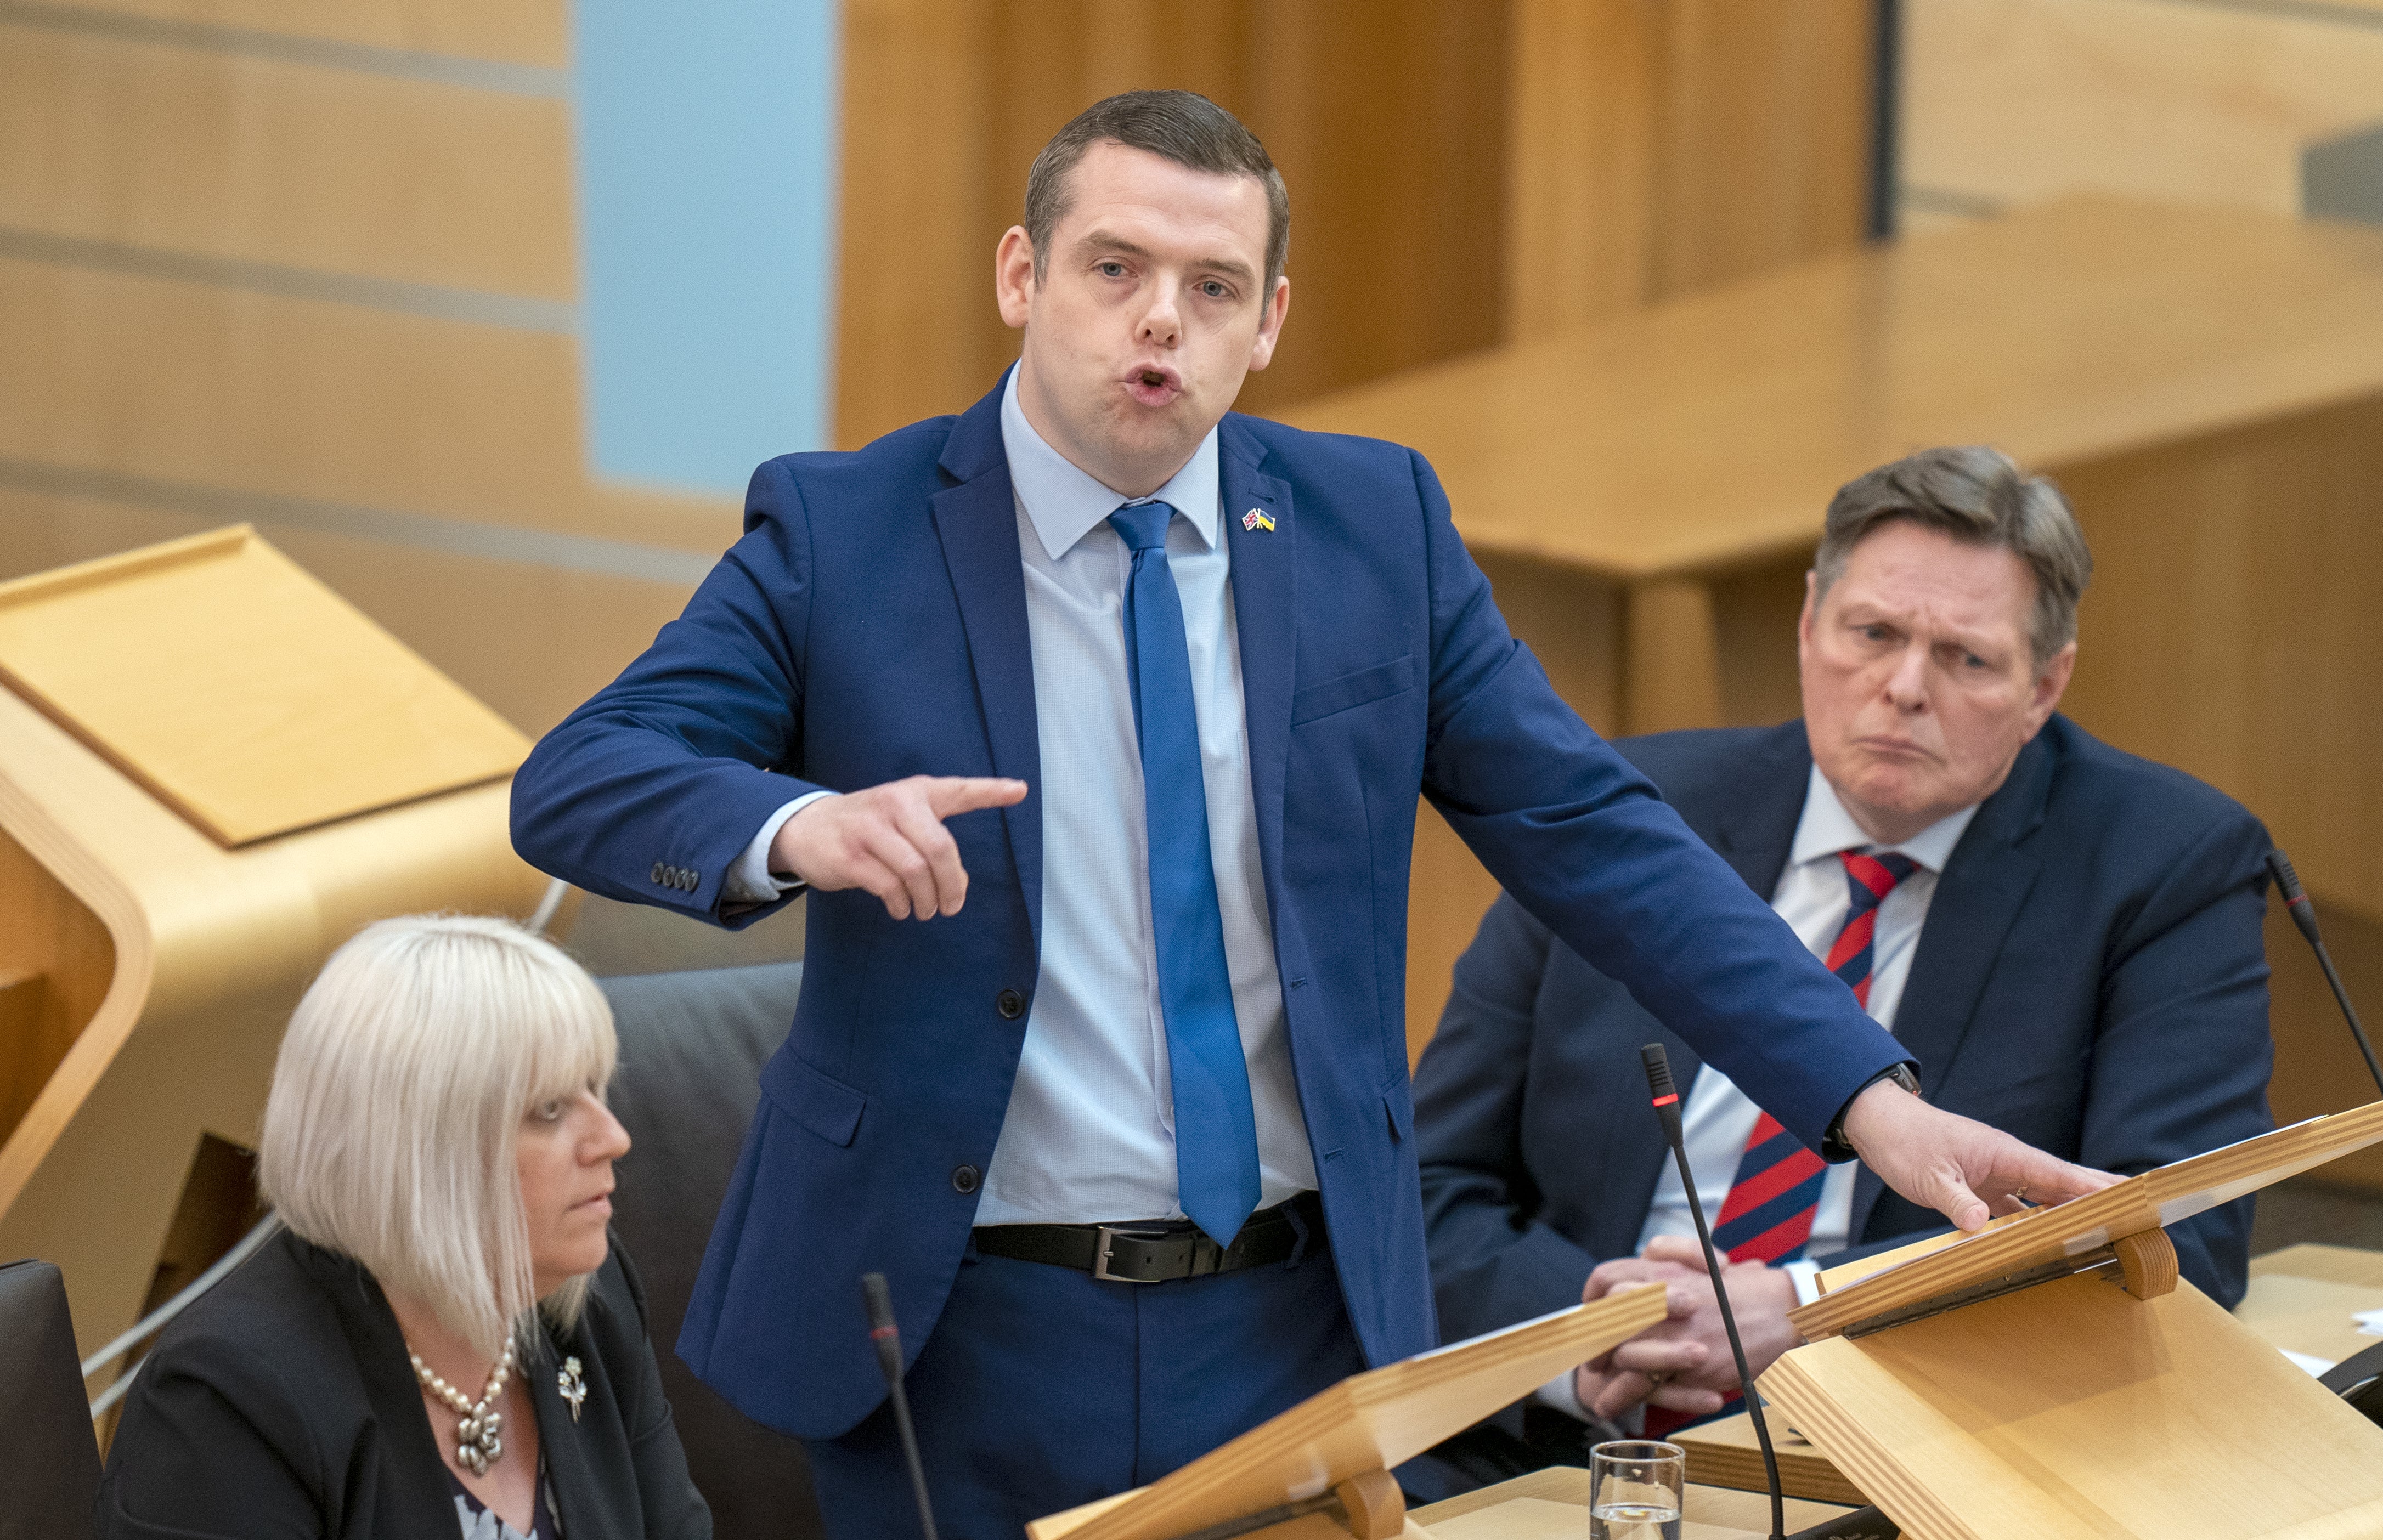 Scottish Conservative party leader Douglas Ross said the drug death figures are ‘heart-breaking’ (Jane Barlow/PA)